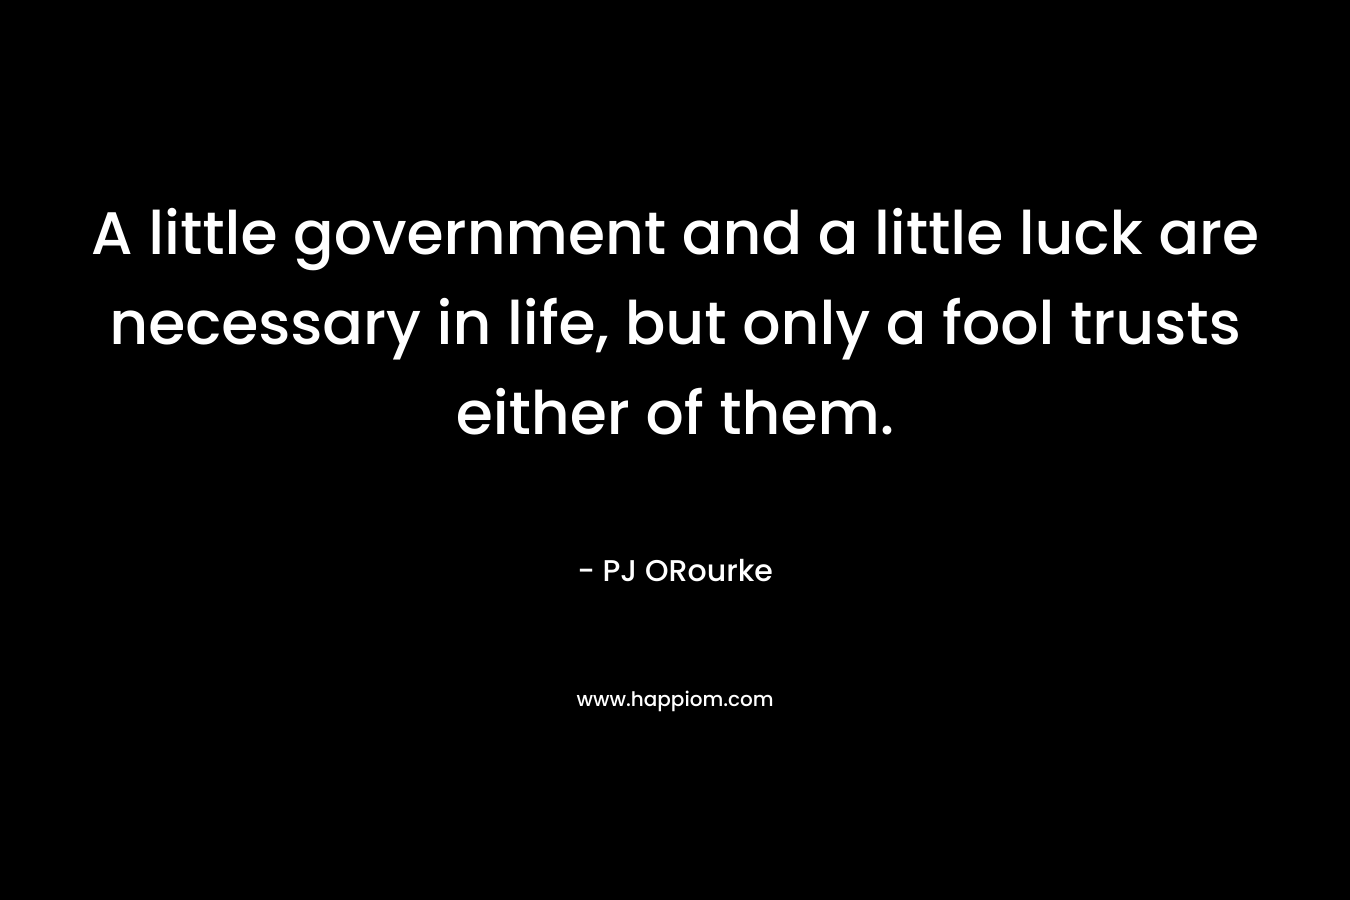 A little government and a little luck are necessary in life, but only a fool trusts either of them.